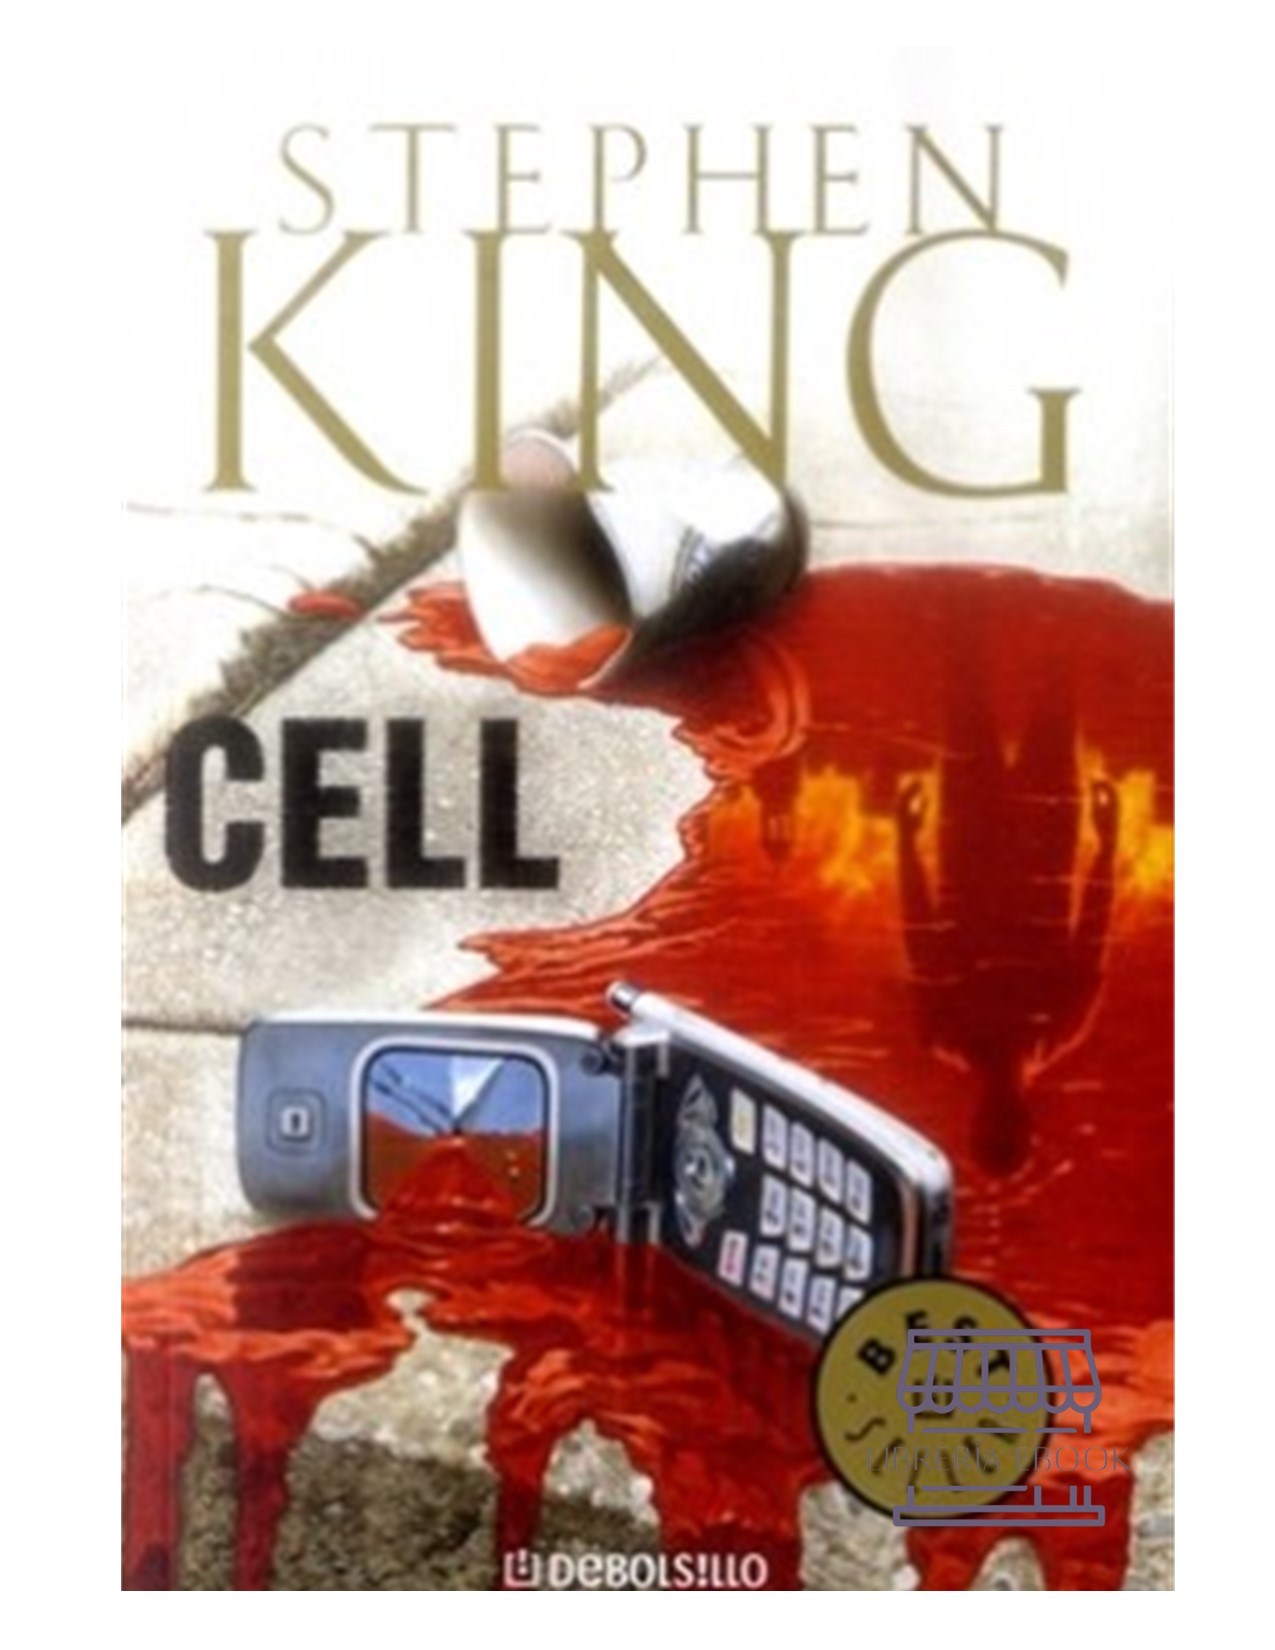 Cell - Stephen King